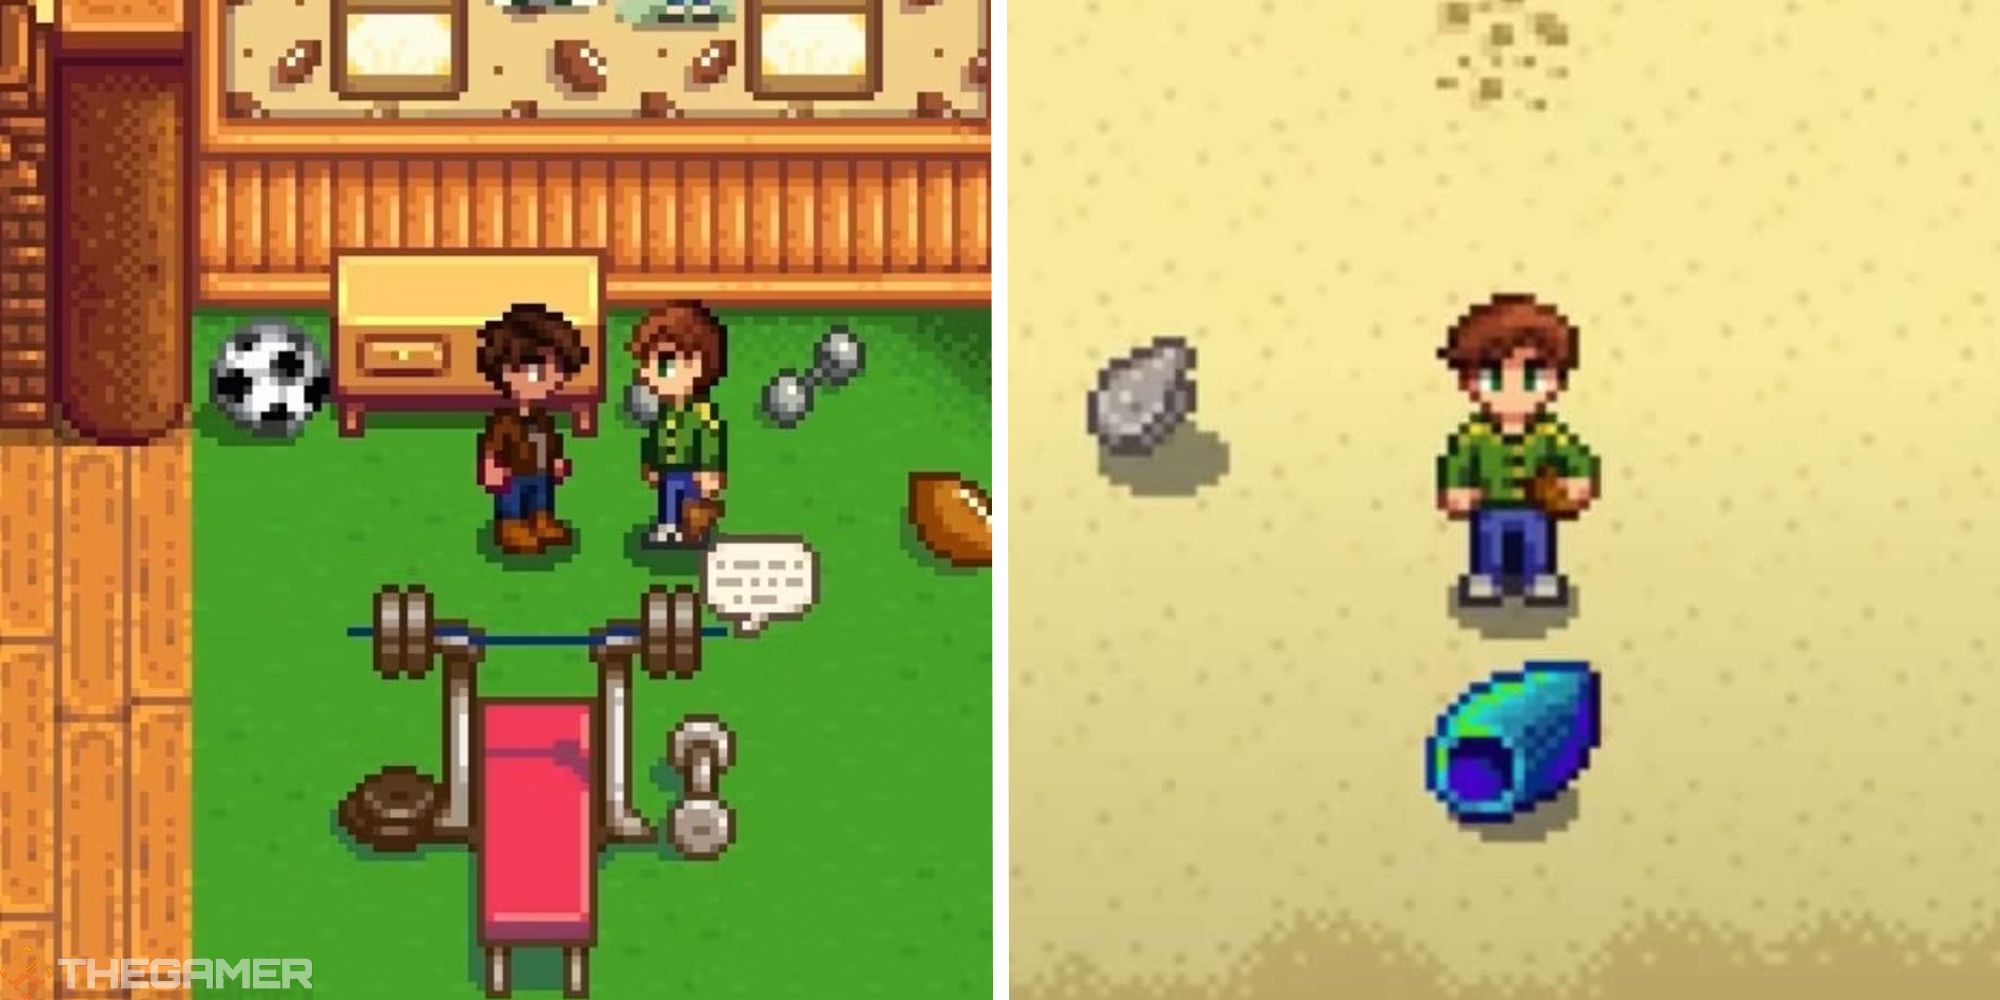 split image showing player in alex's spouse room, next to image of alex on the beach near a rainbow shell